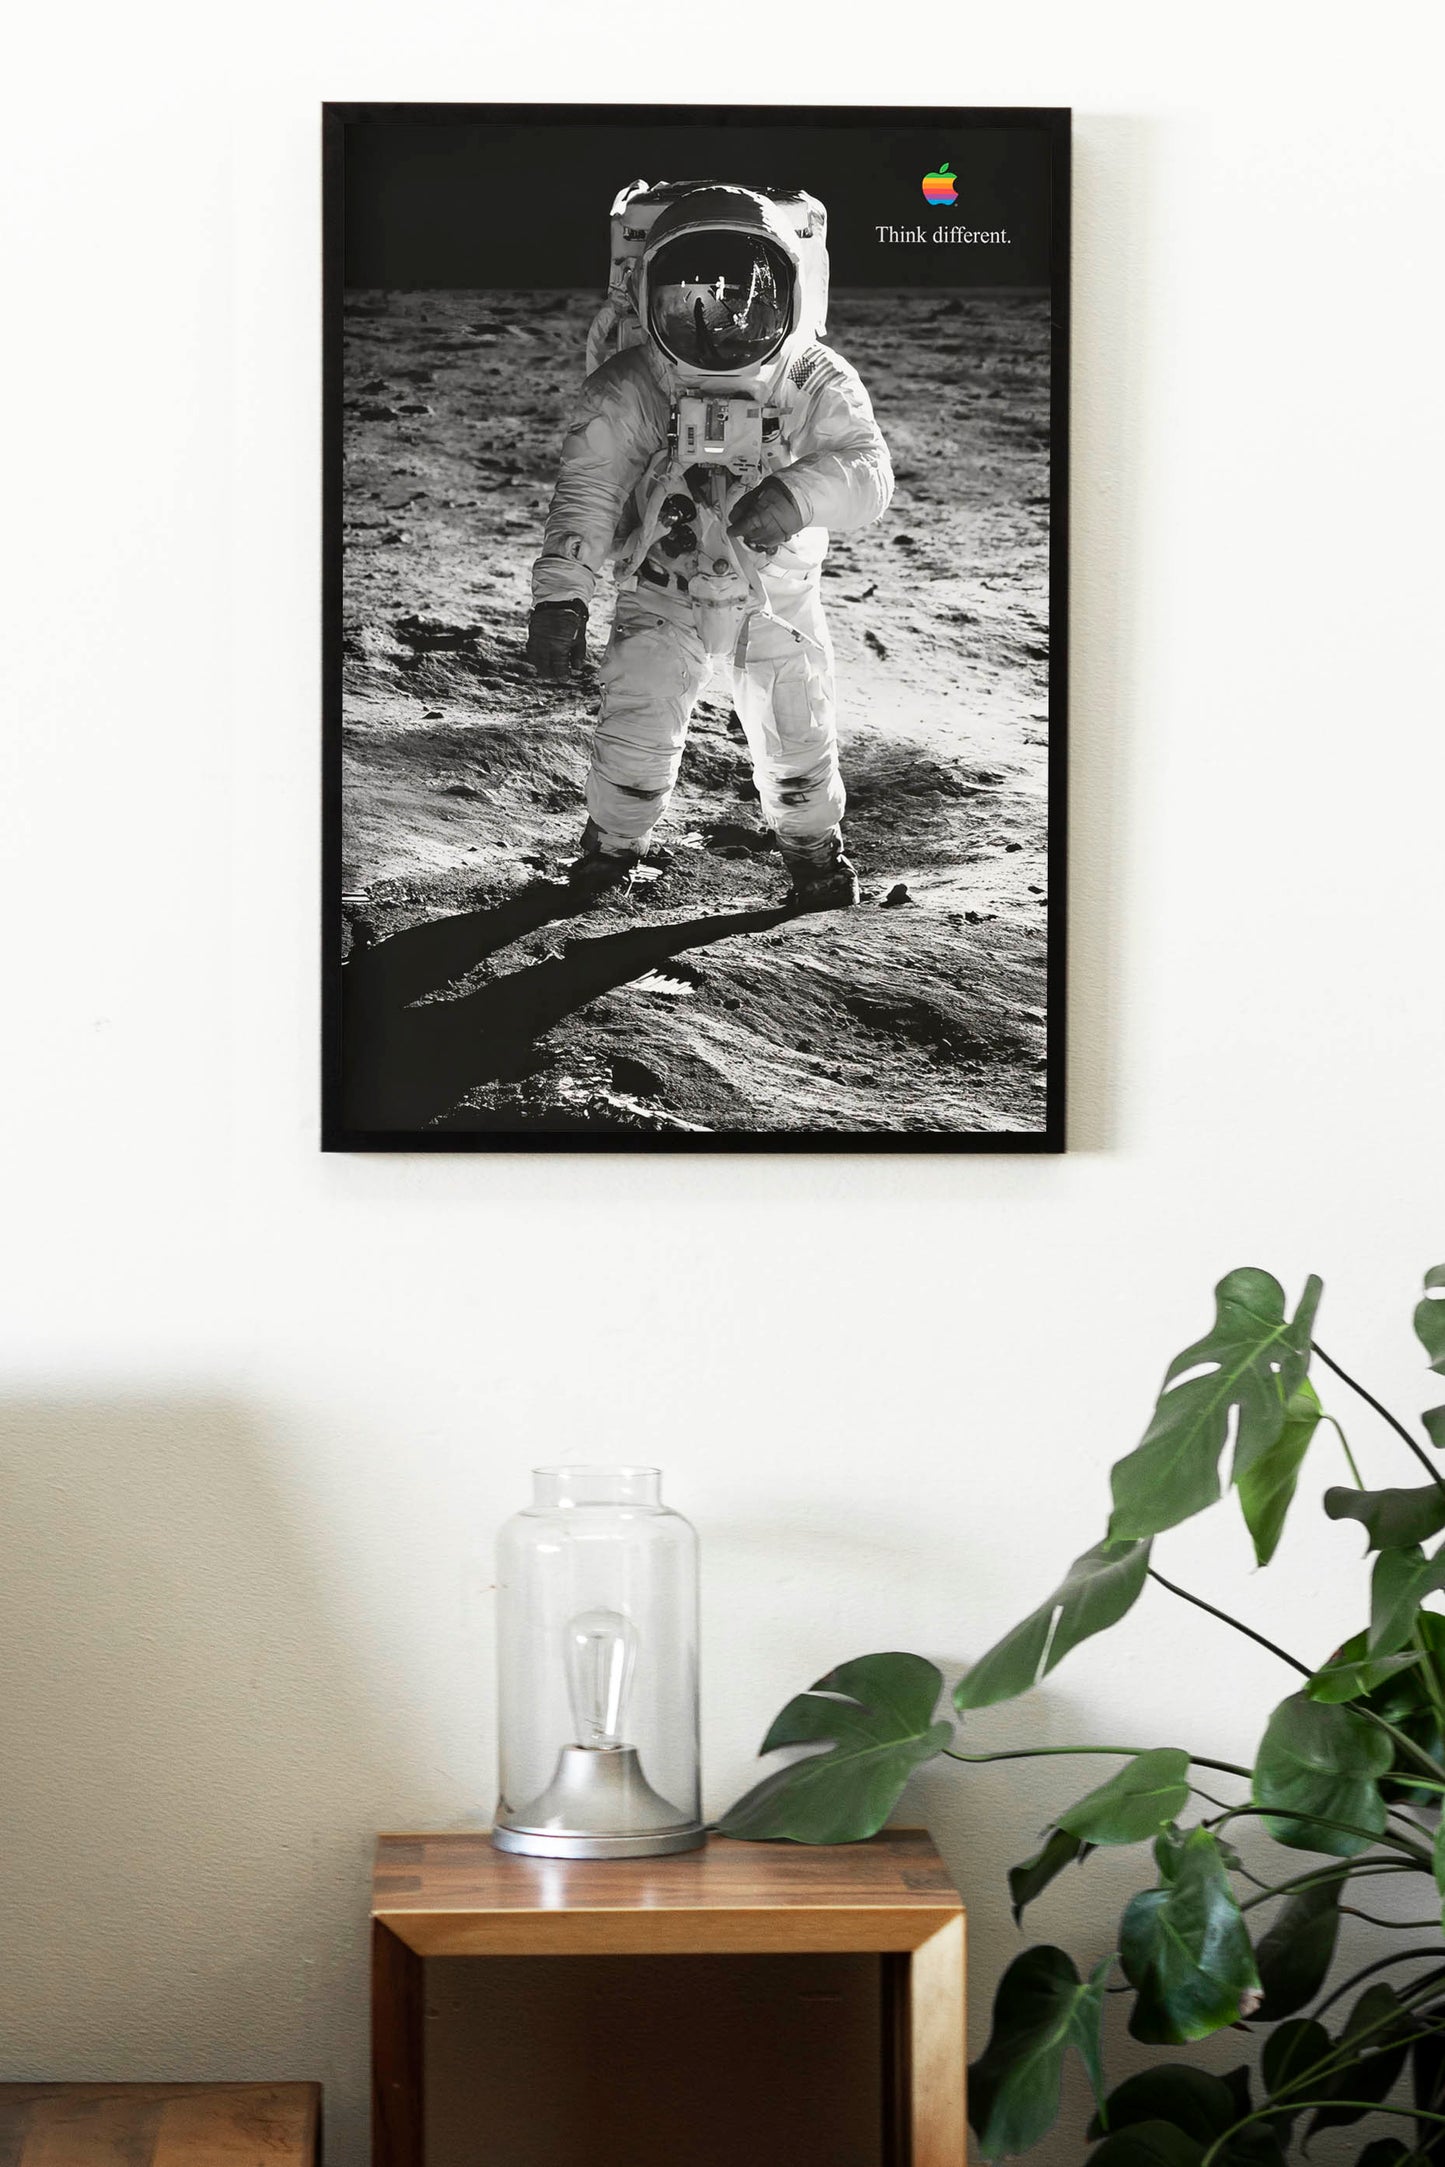 Apple Buzz Aldrin "Think Different" Poster